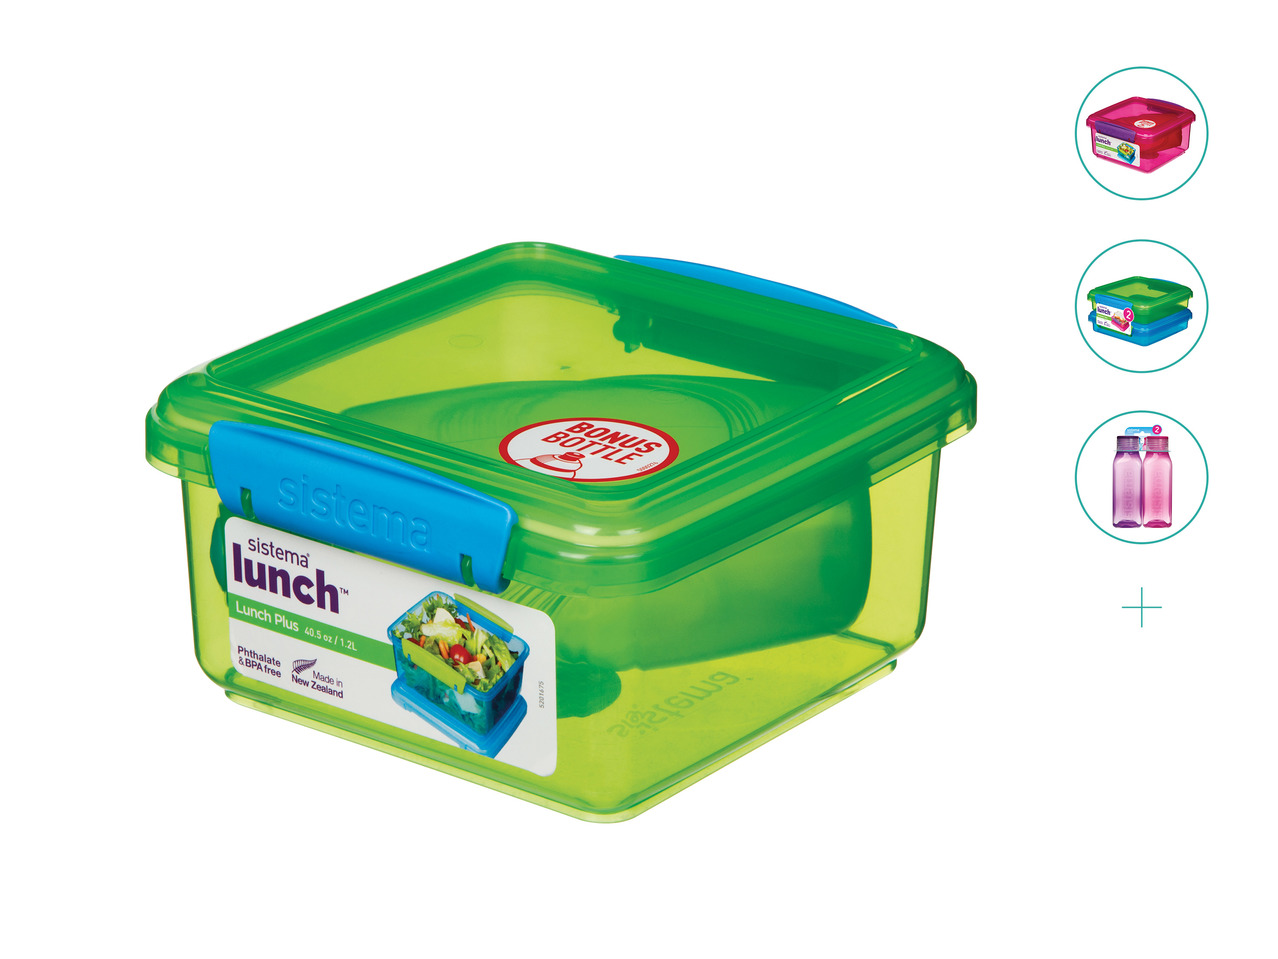 Sistema(R) Lunchbox and Water Bottle Assortment1